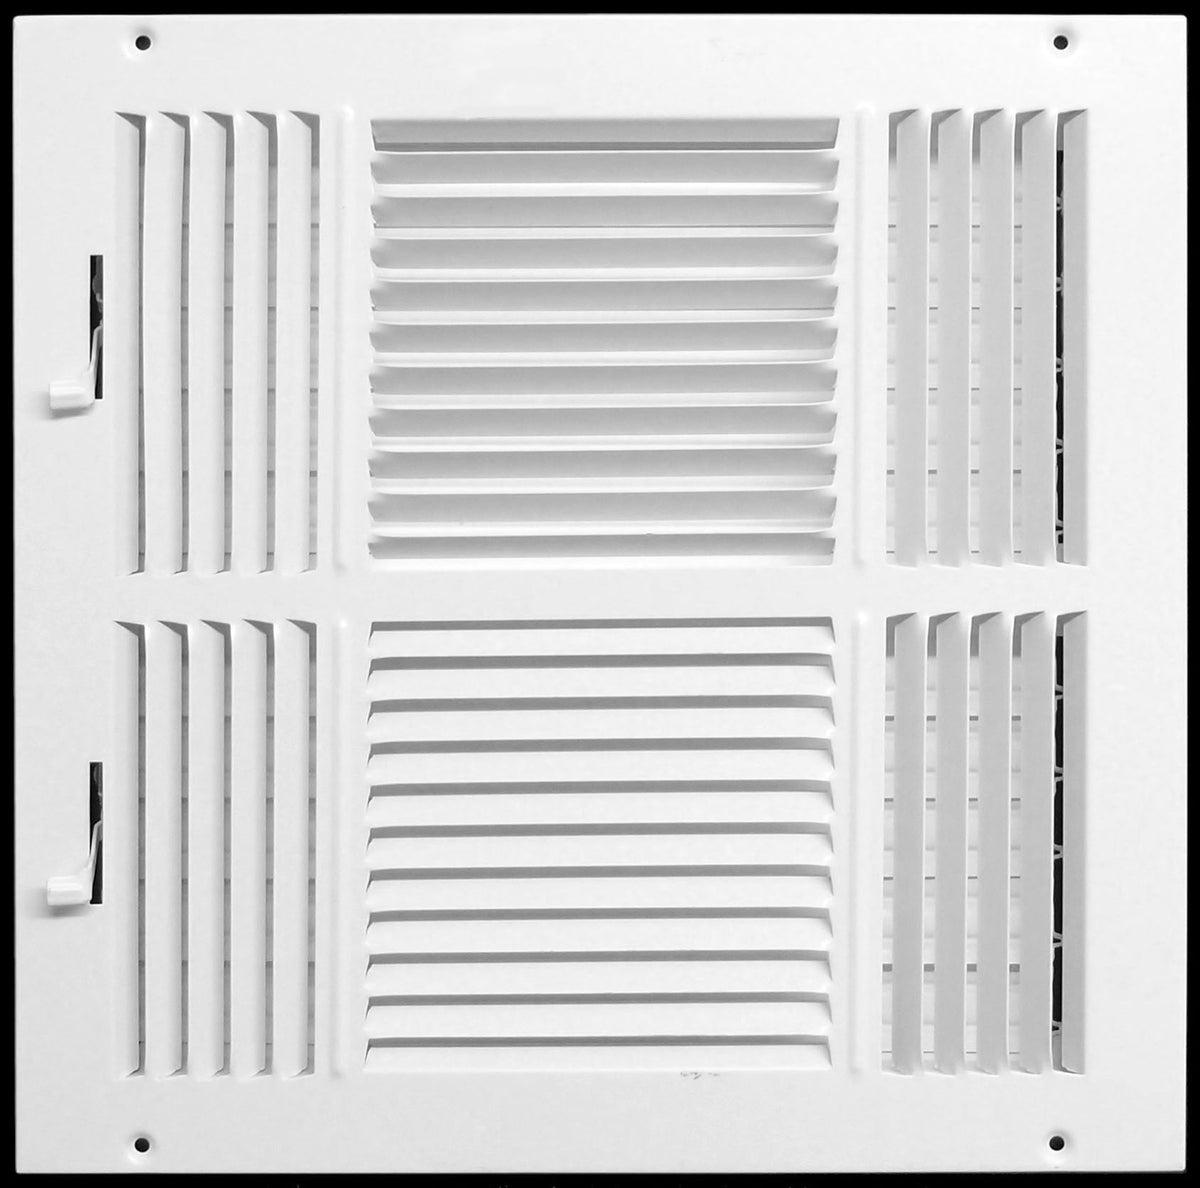 18&quot; X 18&quot; 4-Way AIR SUPPLY GRILLE - DUCT COVER &amp; DIFFUSER - Flat Stamped Face